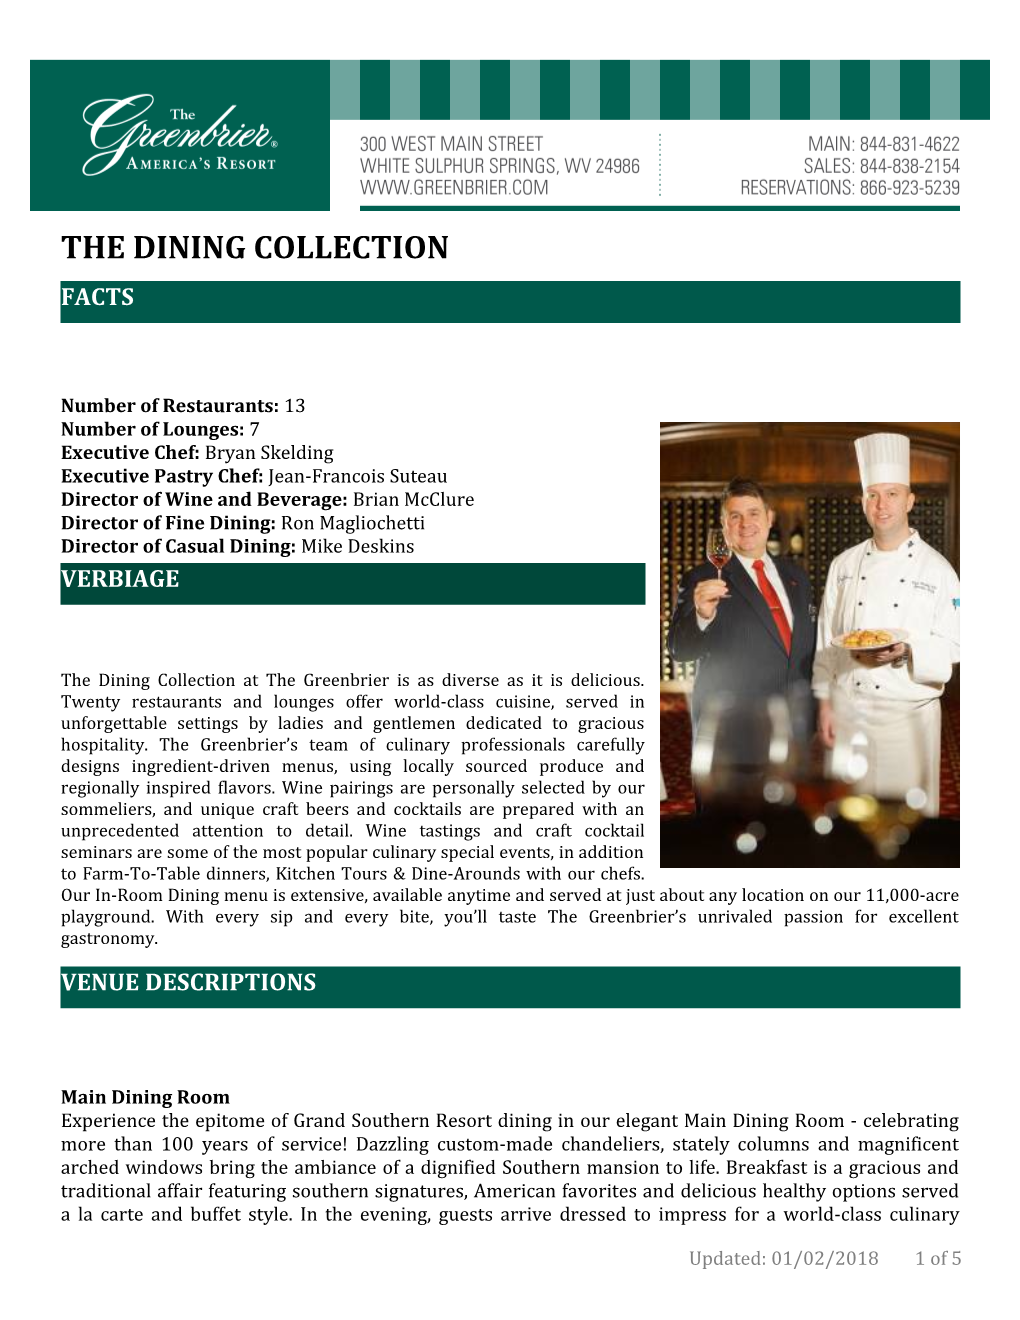 The Dining Collection